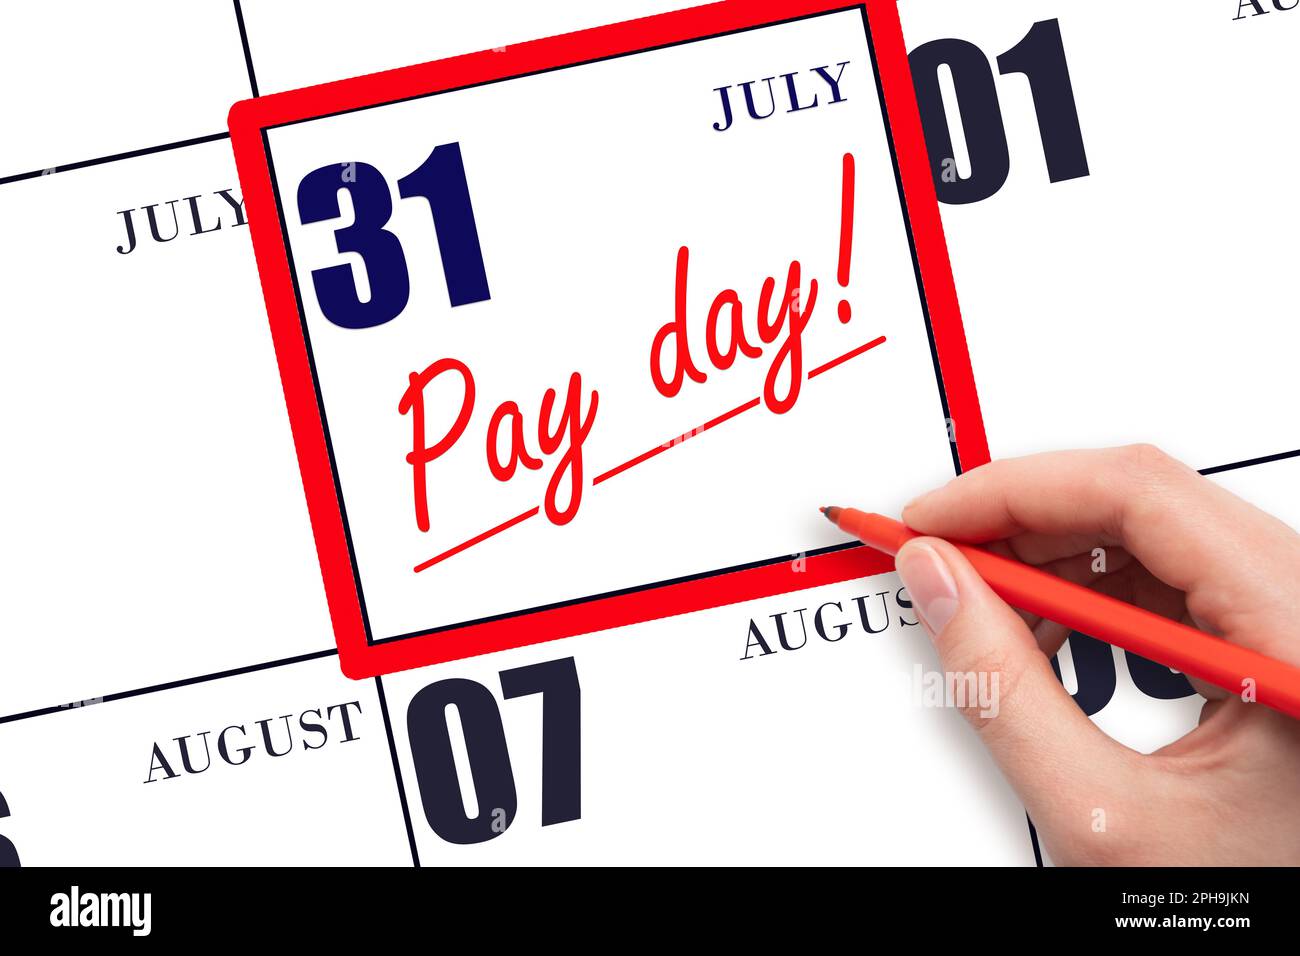 31st day of July. Hand writing text PAY DATE on calendar date July 31 and underline it. Payment due date.  Reminder concept of payment. Summer month, Stock Photo